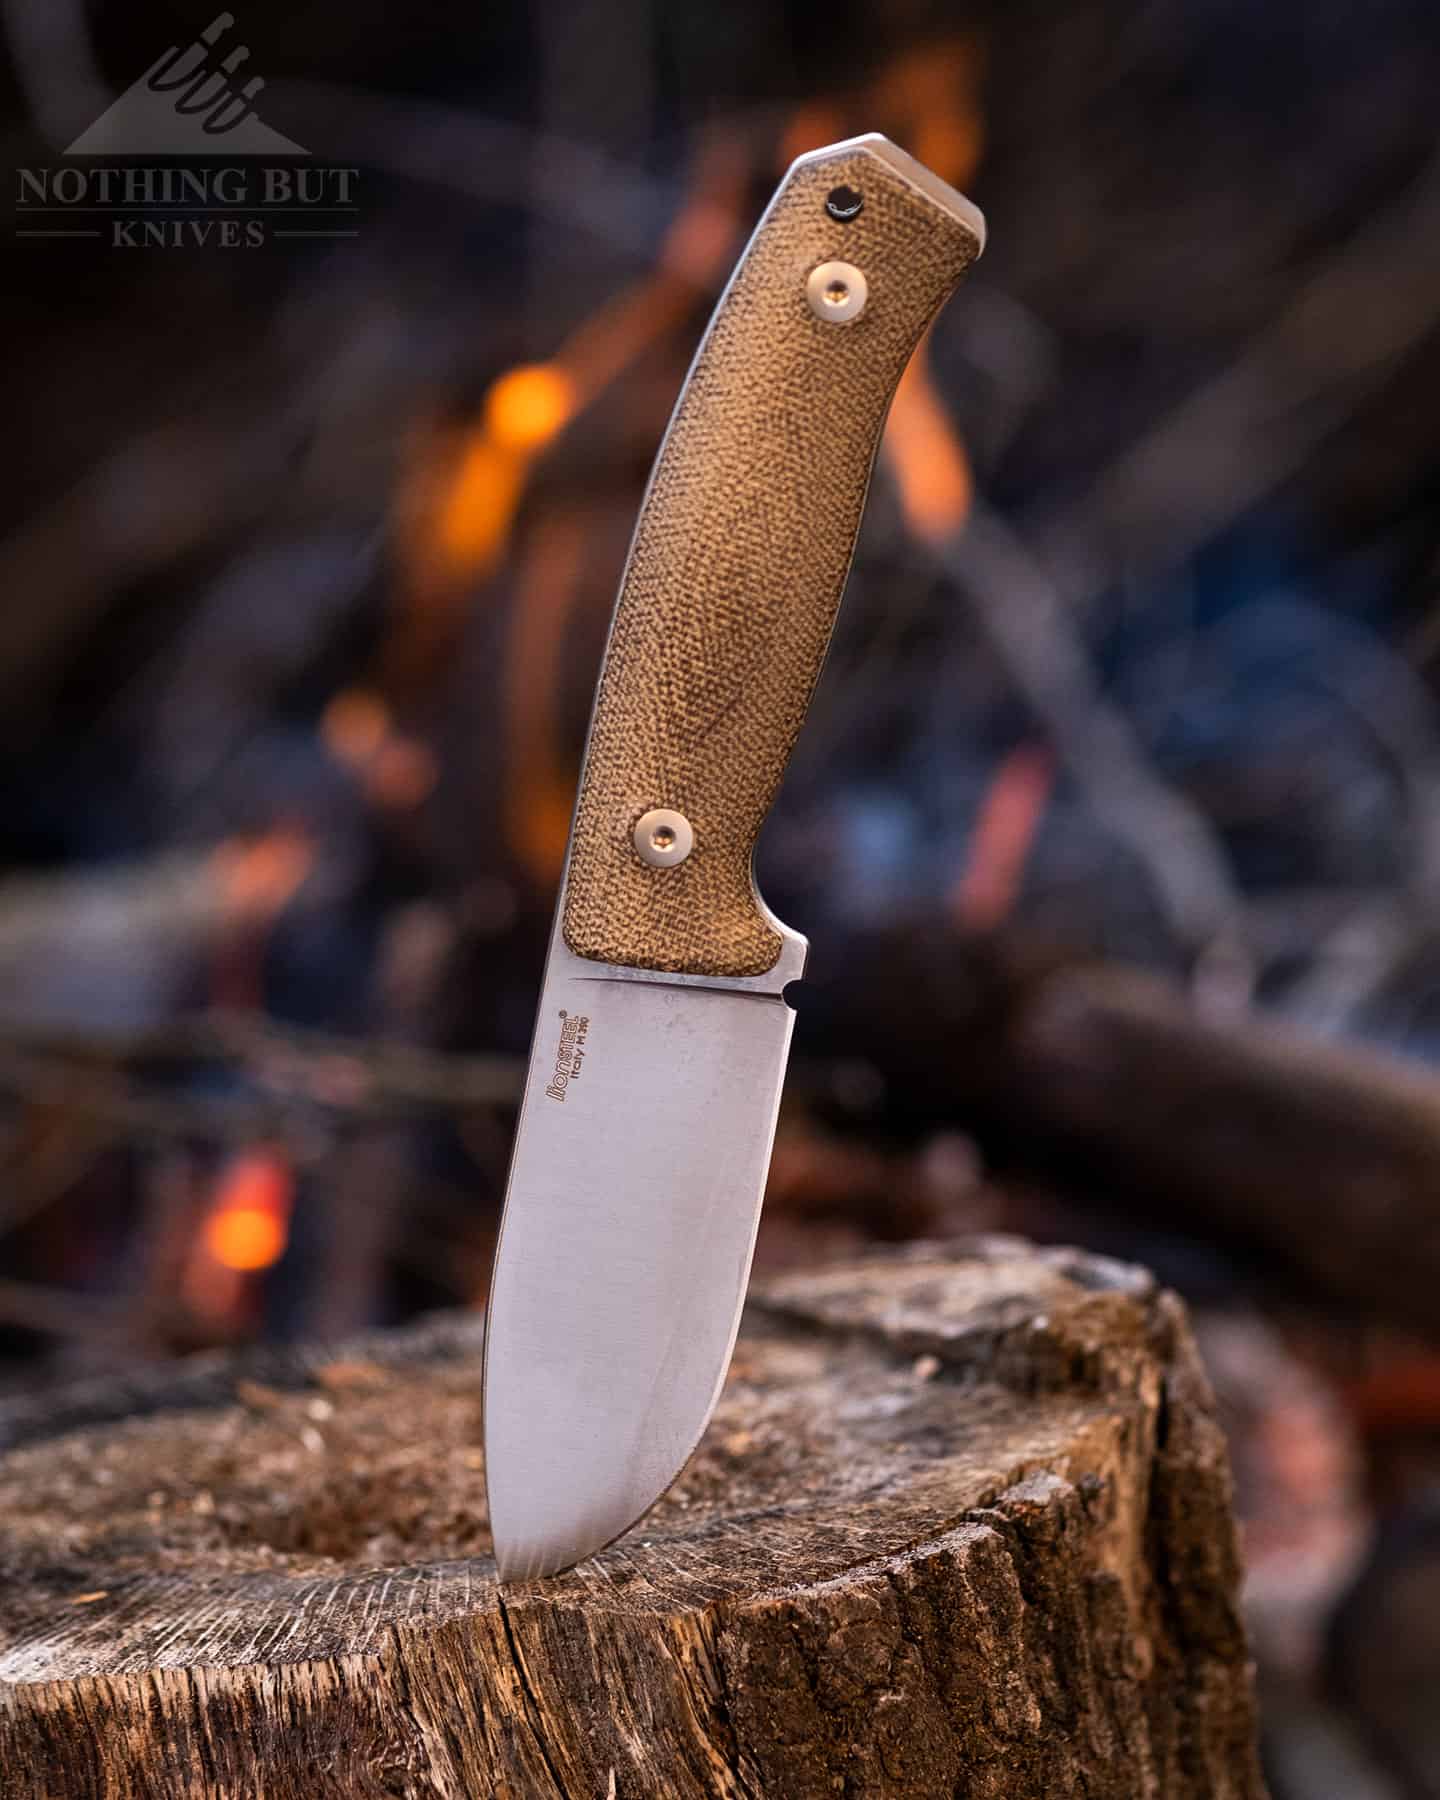 https://www.nothingbutknives.com/wp-content/uploads/2023/03/Camping-with-the-LionSteel-M2M.jpg